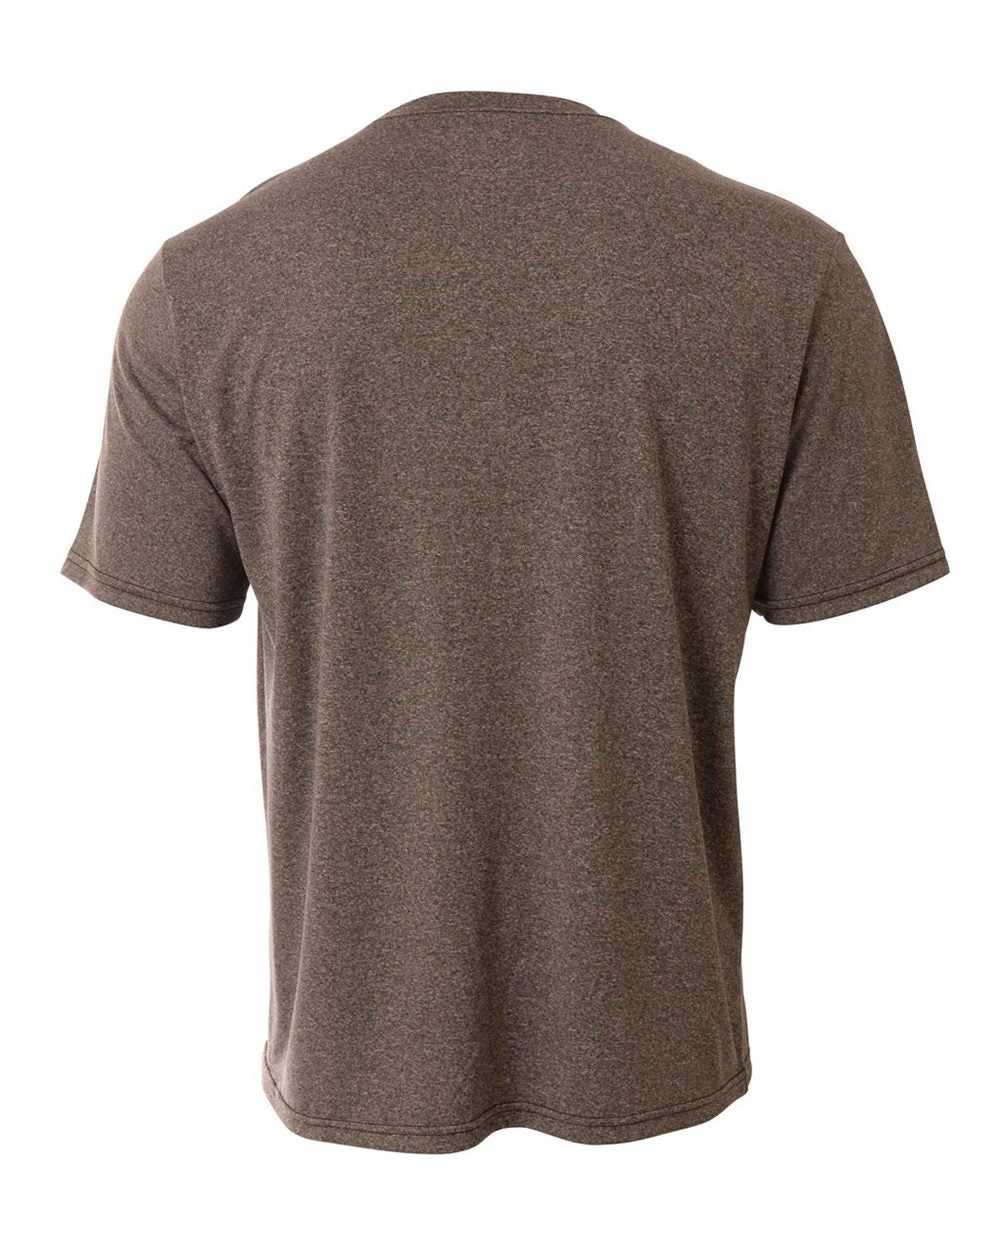 A4 N3381 Topflight Heather Tee - Charcoal - HIT a Double